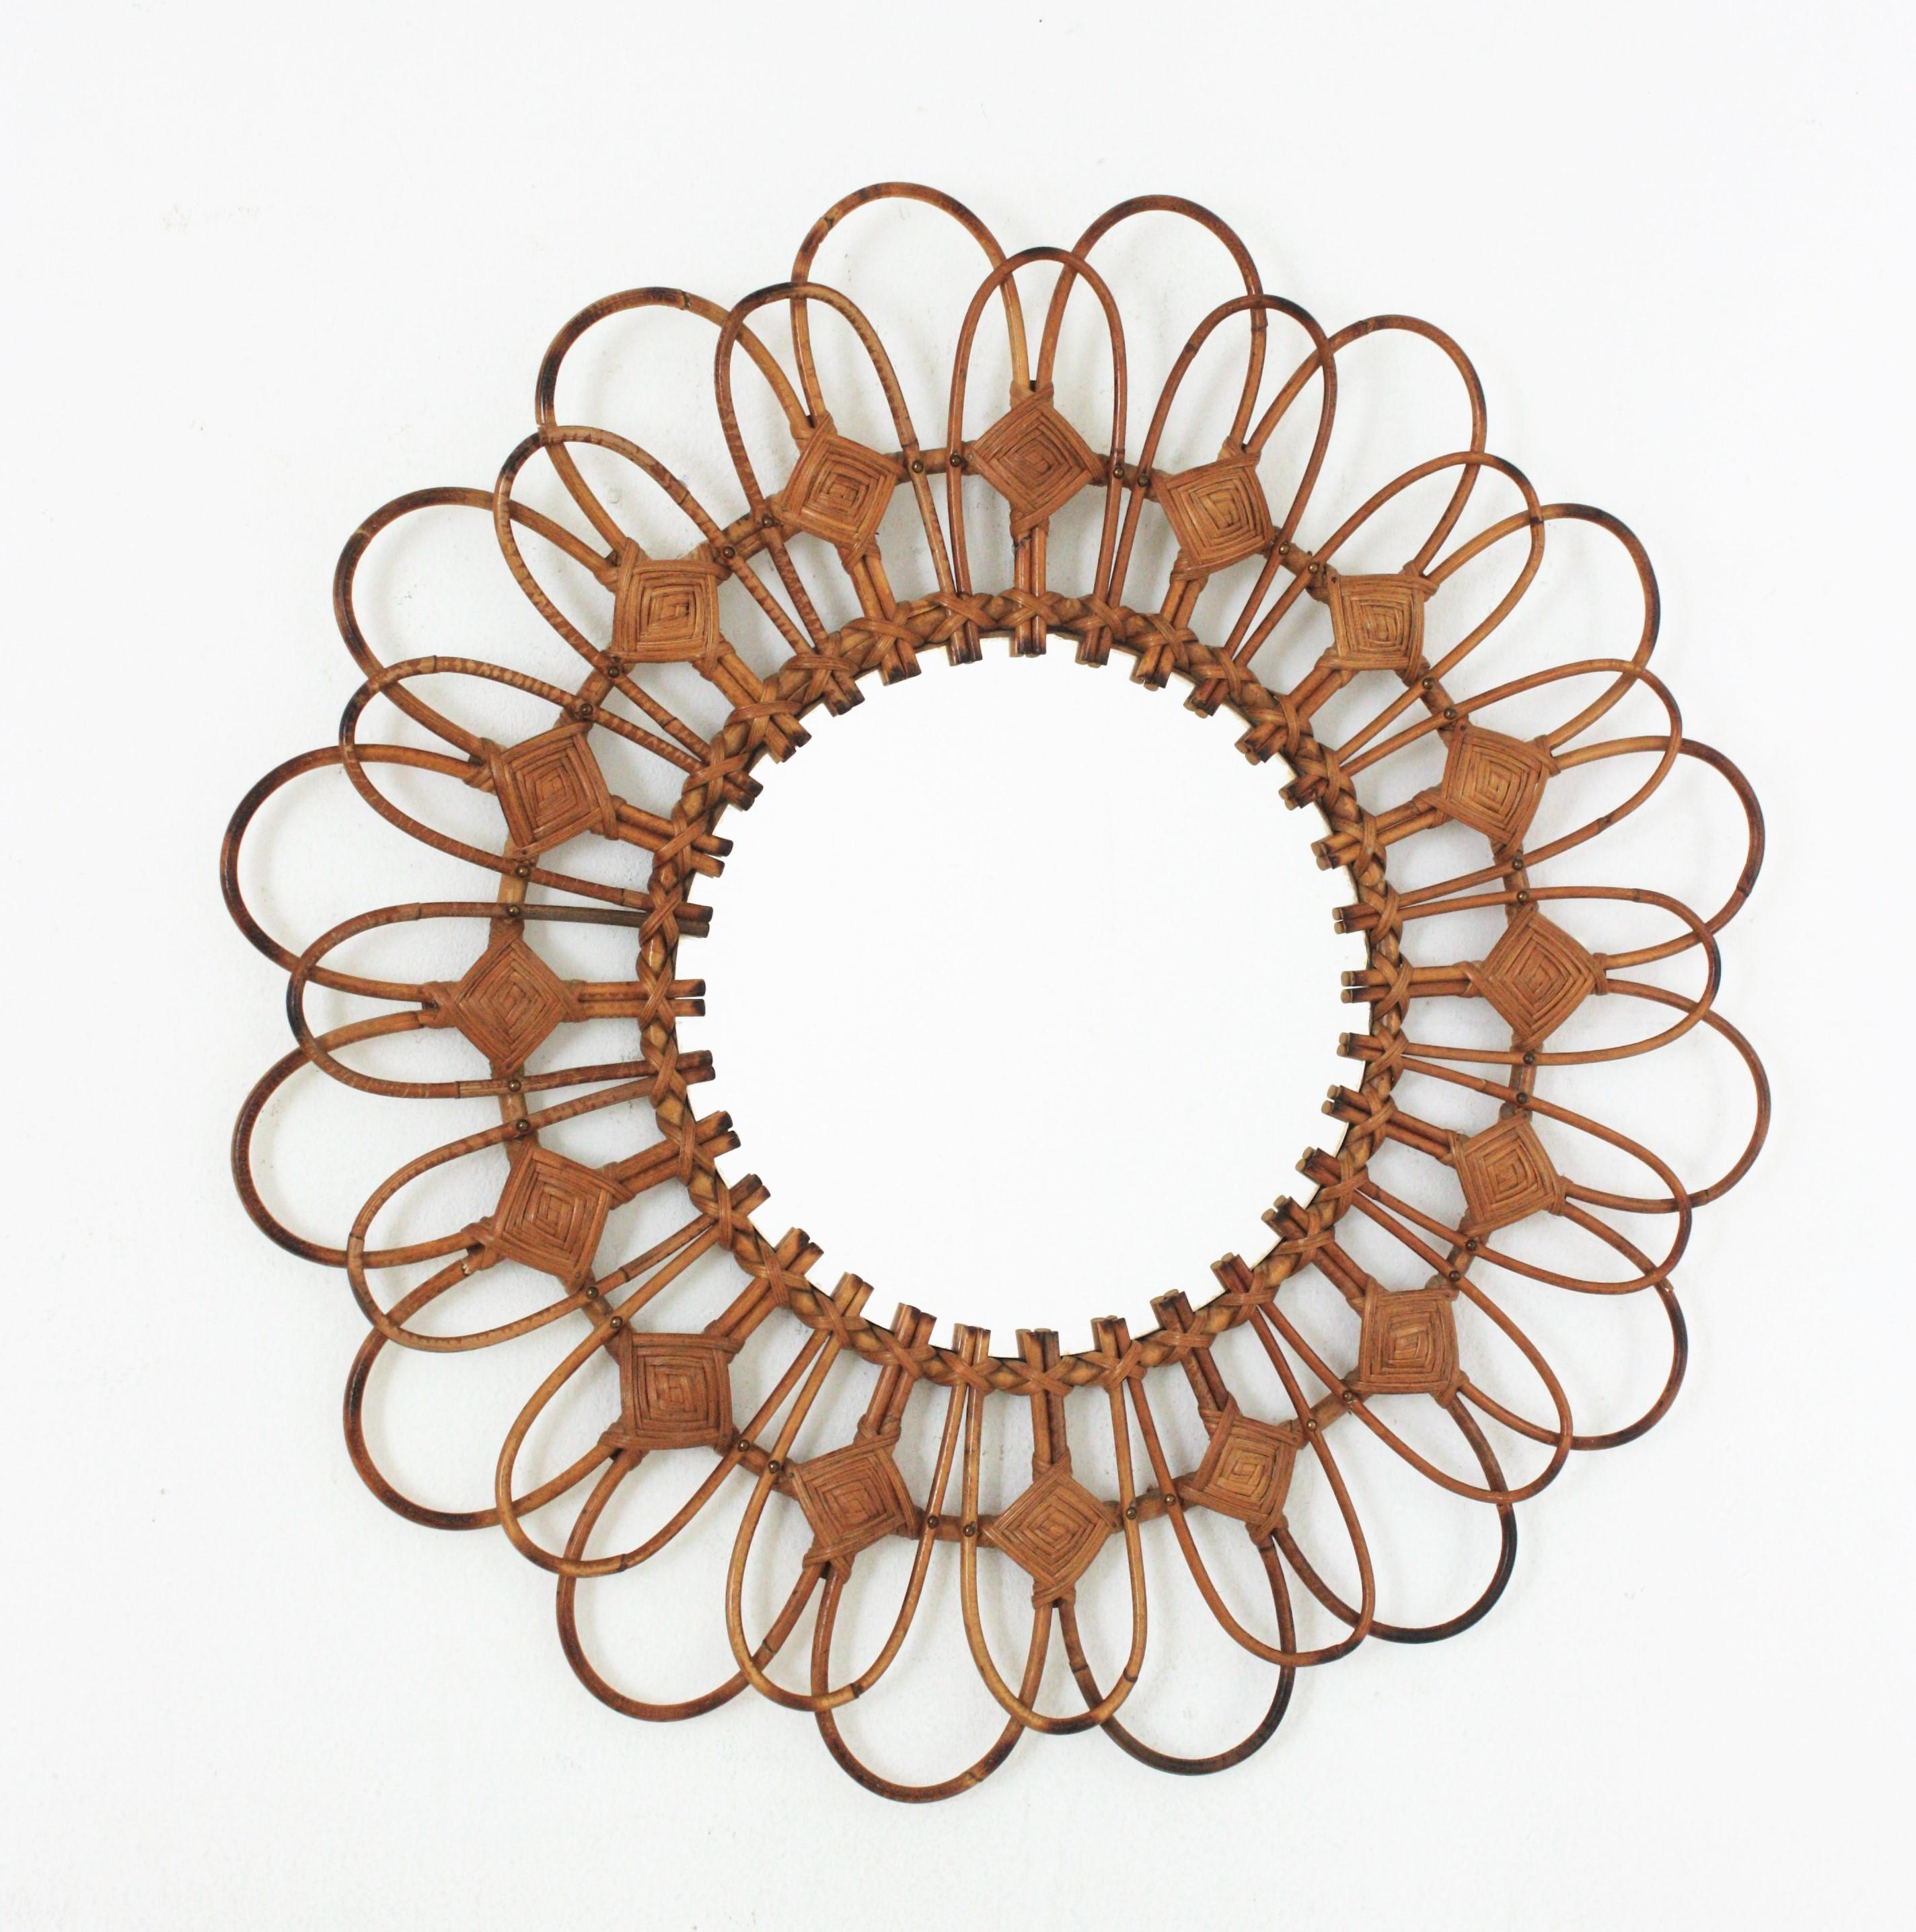 French Riviera Flower Sunburst Mirror in Rattan, circa 1960s
Handcrafted sunburst / flower mirror with rattan and wicker frame, France, 1960s.
This eye-catching Mediterranean sunburst mirror was handcrafted in France at the sixties and it has all